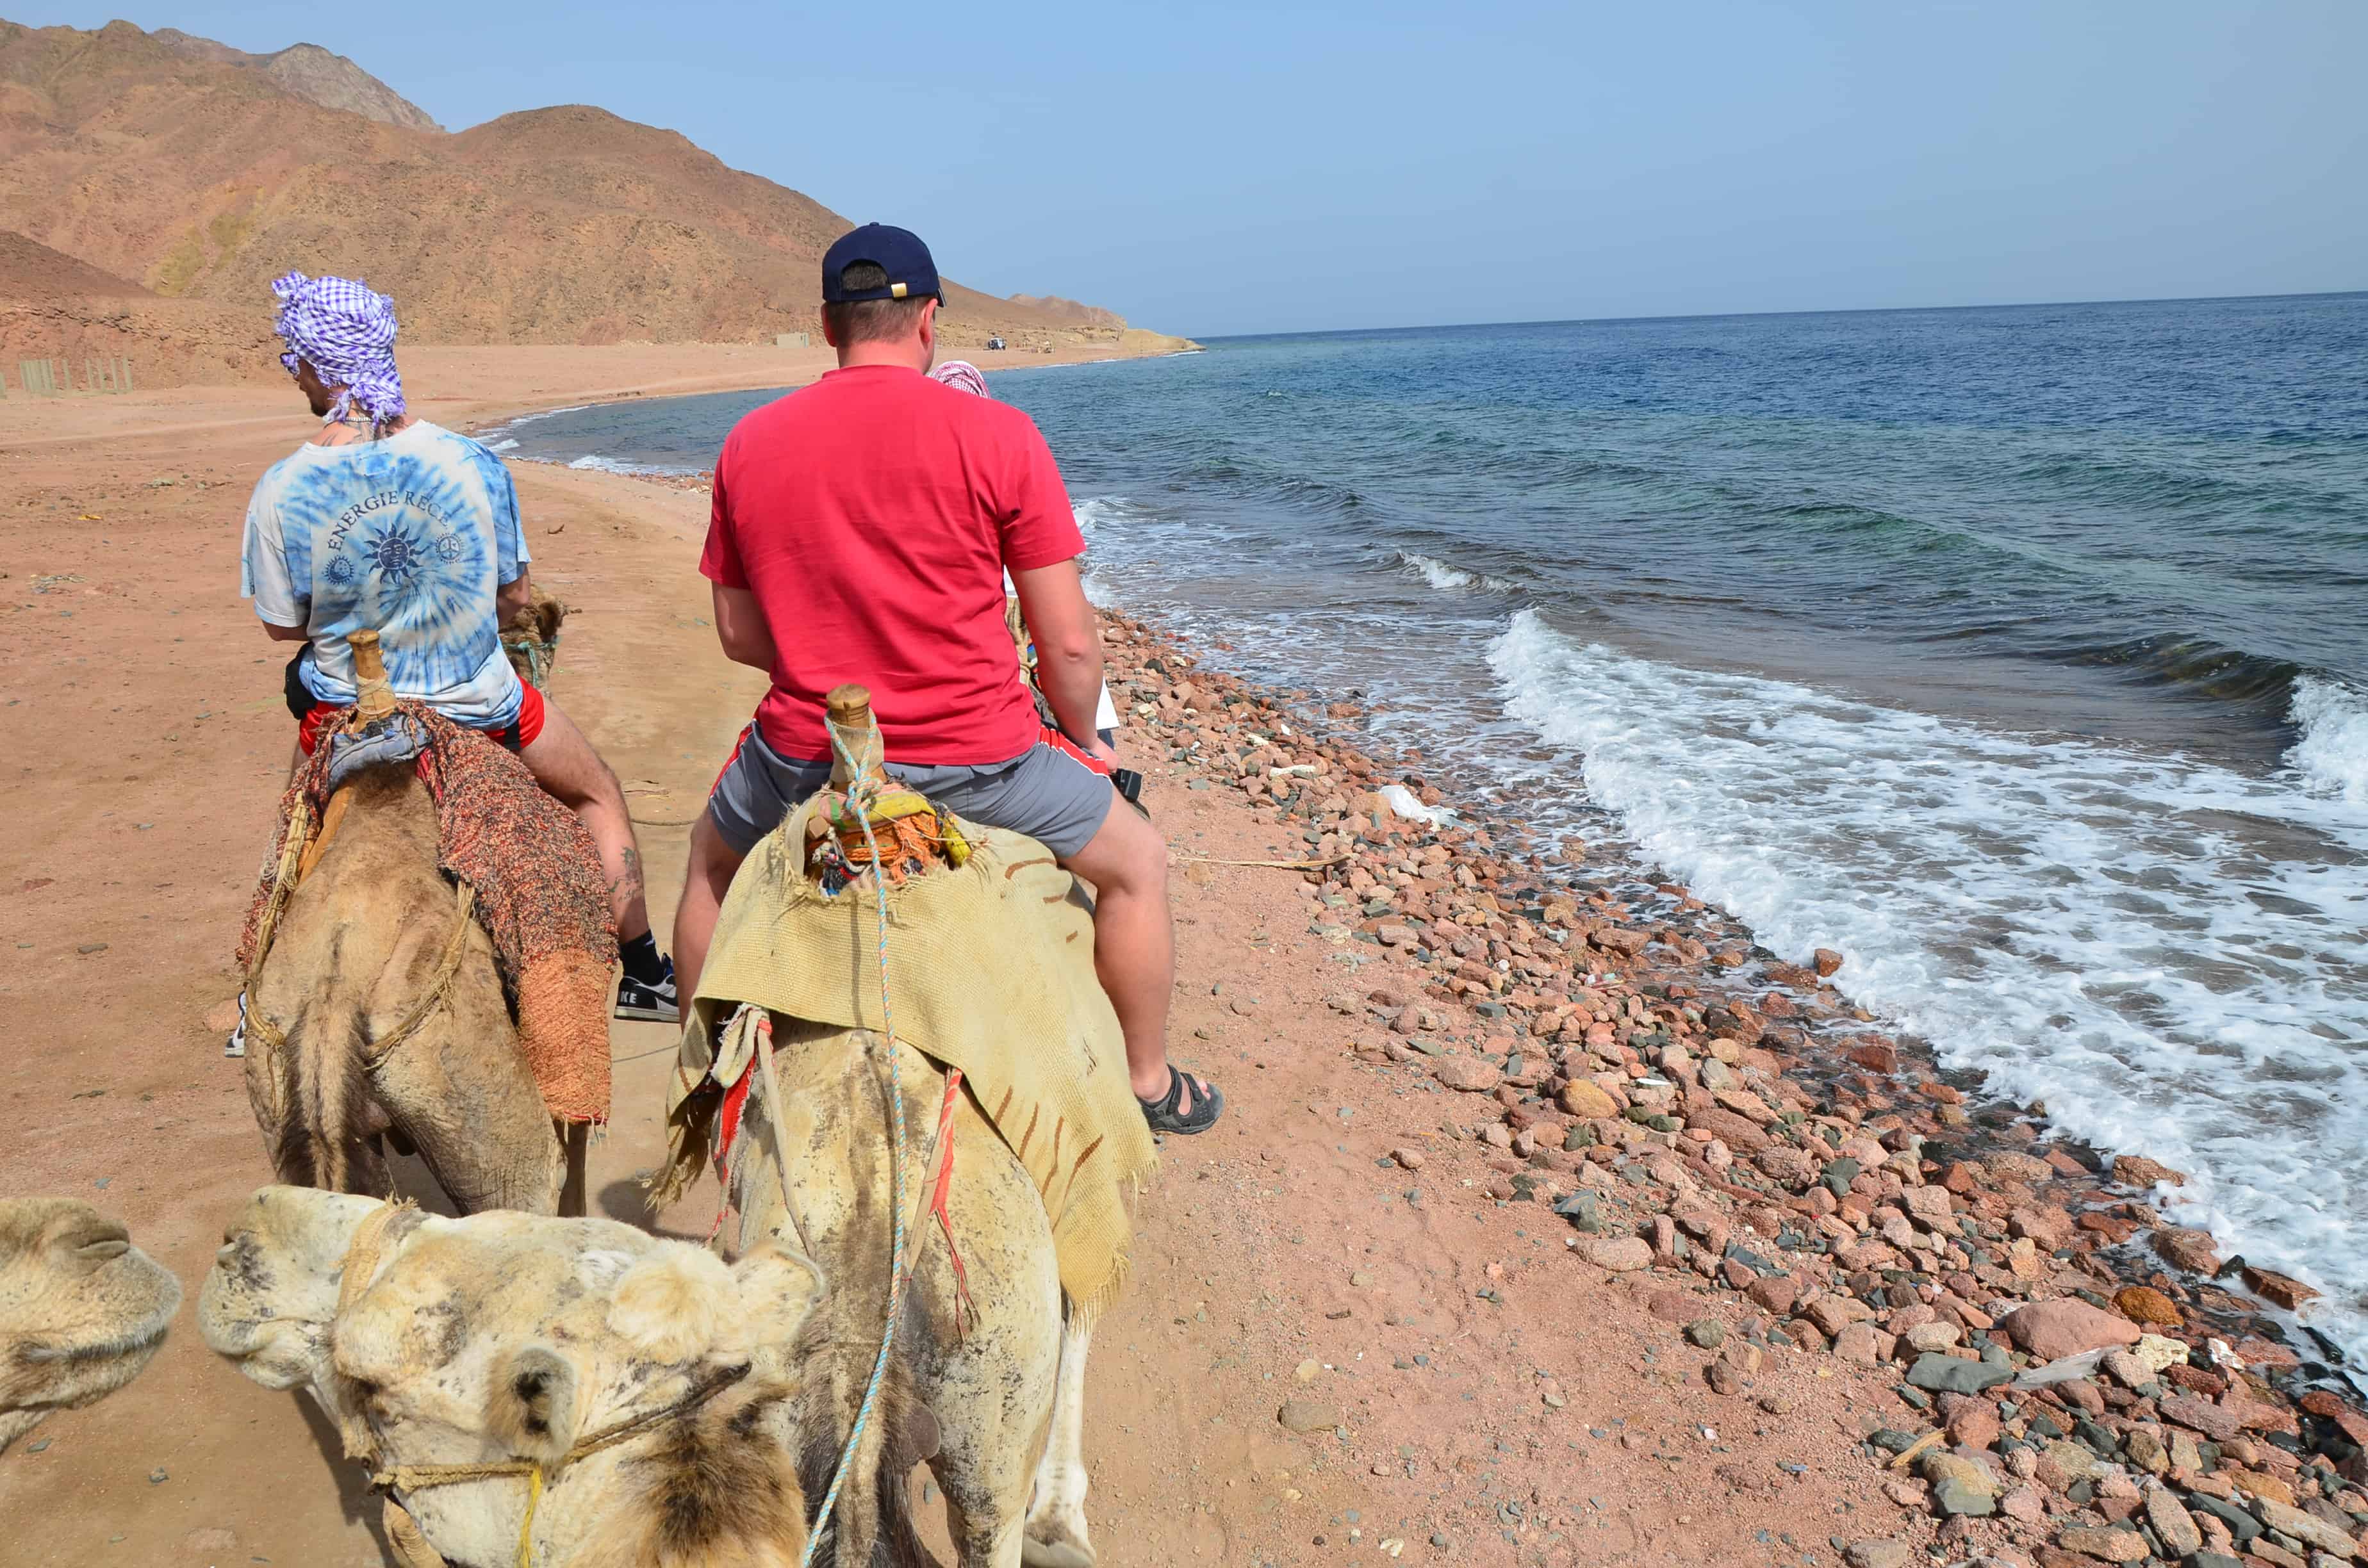 Riding camels on the beach at Abu Galom in Sinai, Egypt